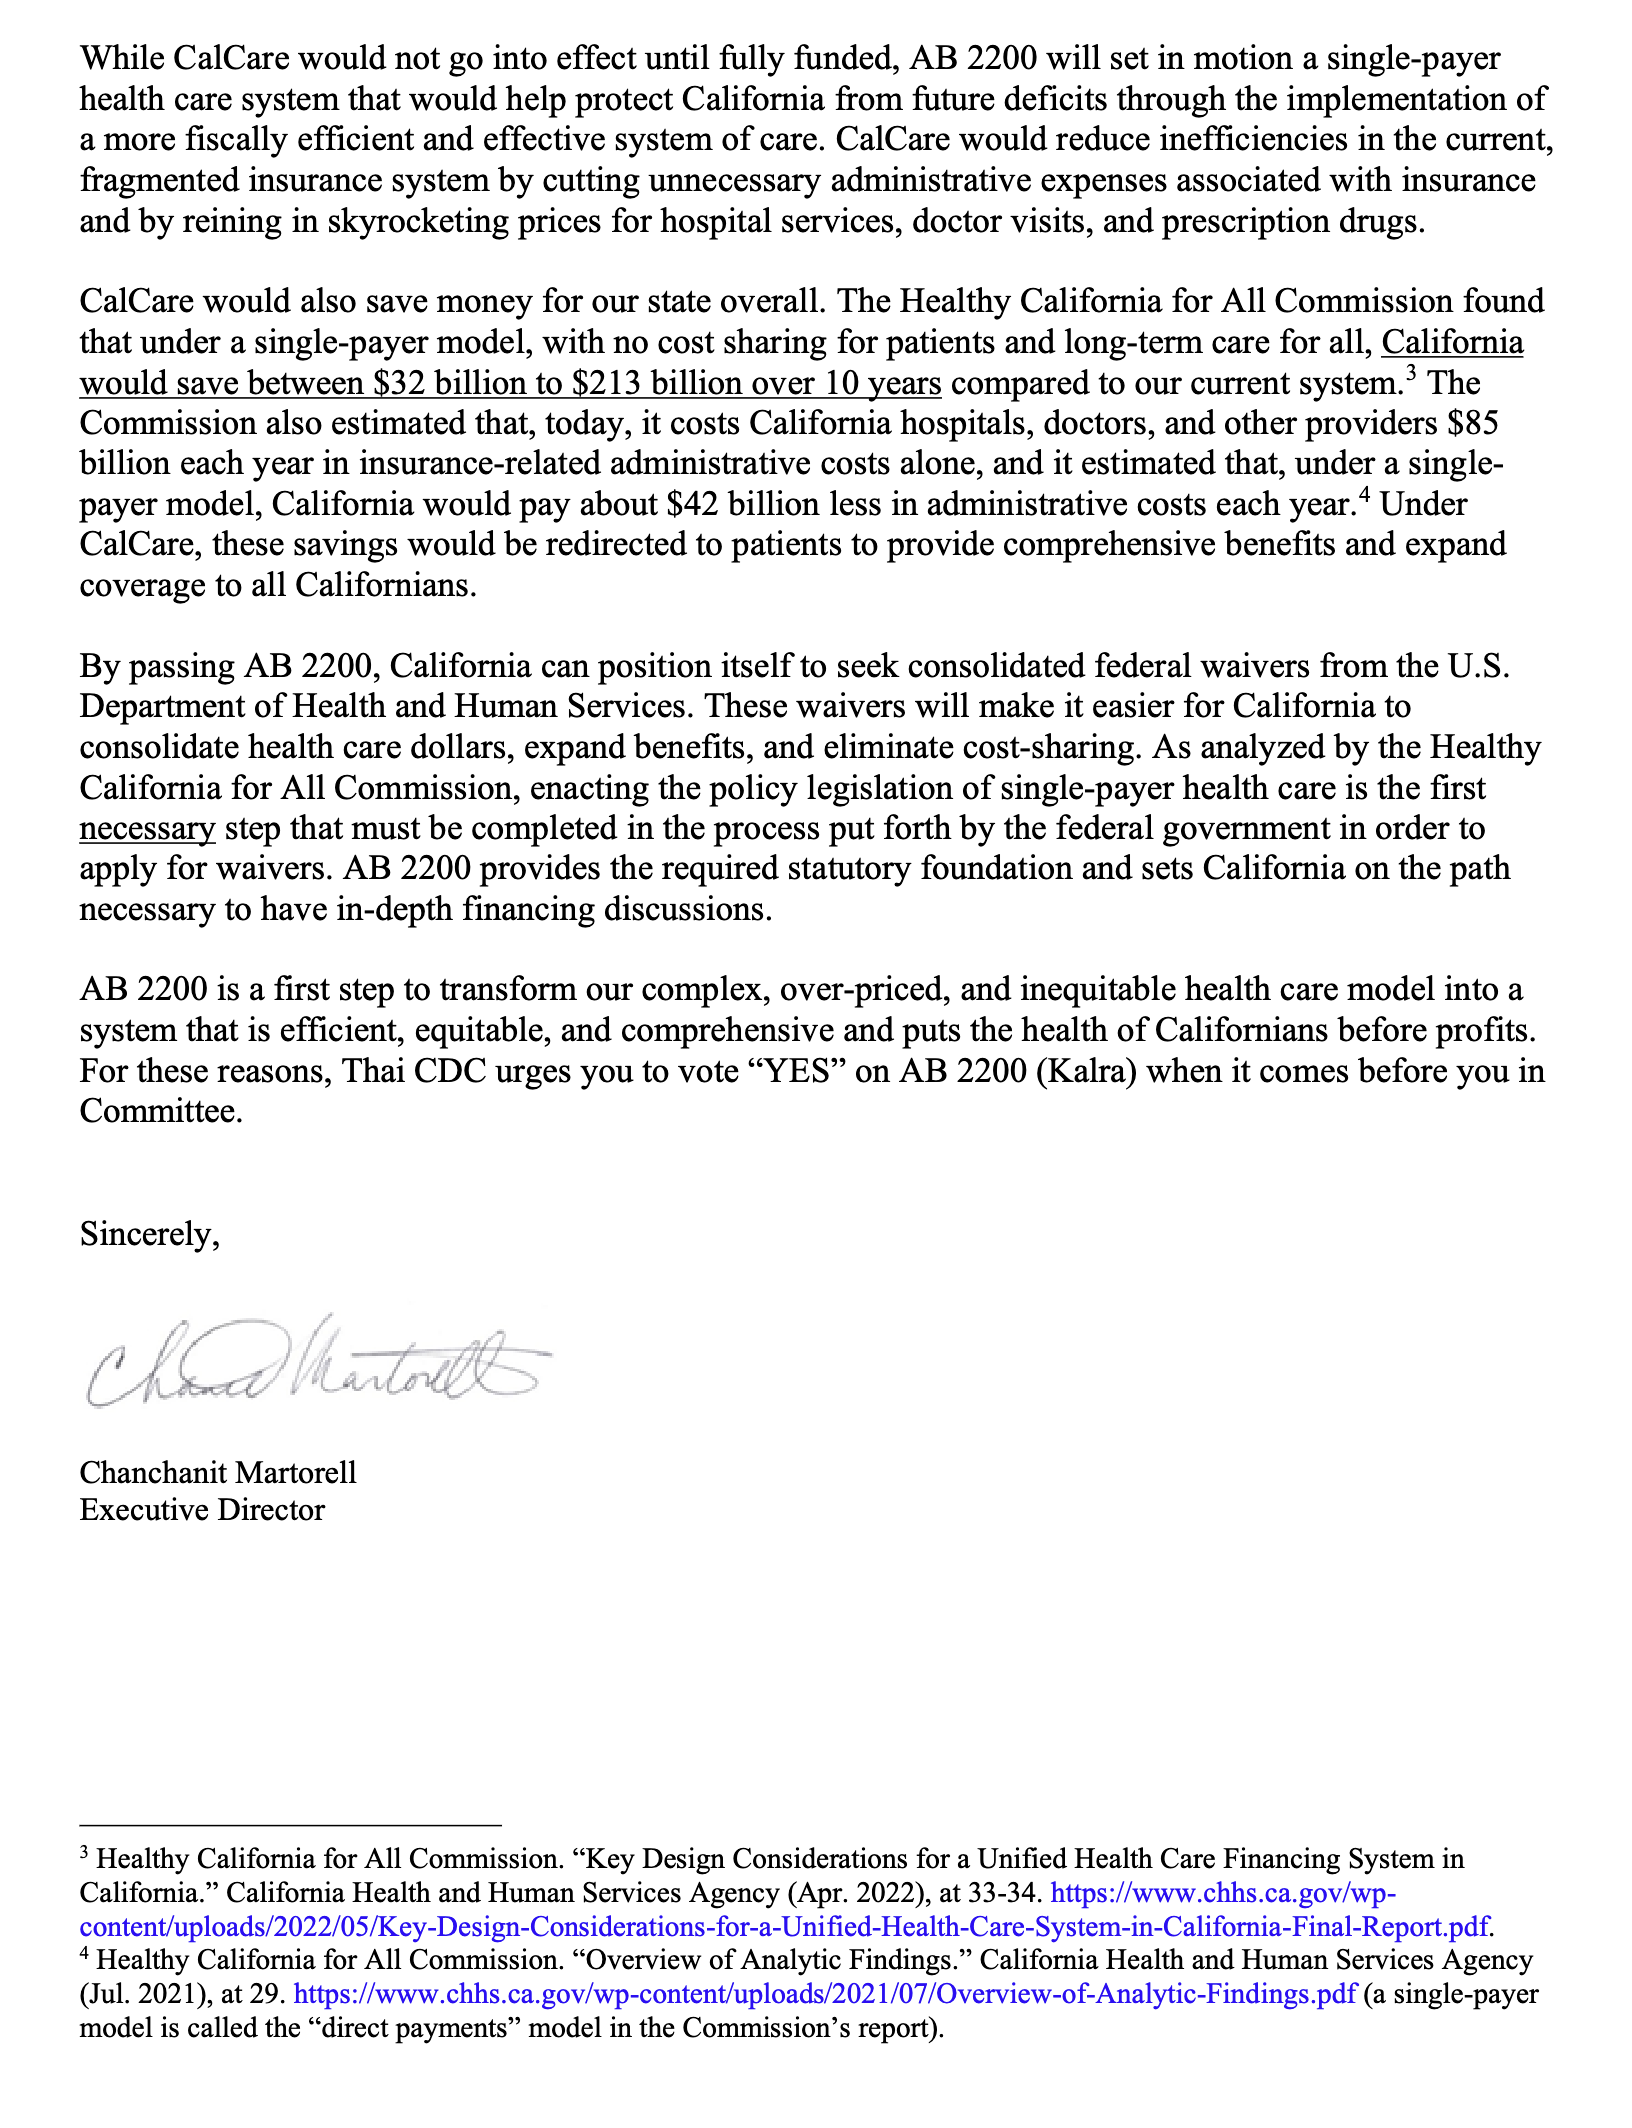 Thai CDC support letter for AB 2200 to the CA Assembly Committee on Health, P2 of 2